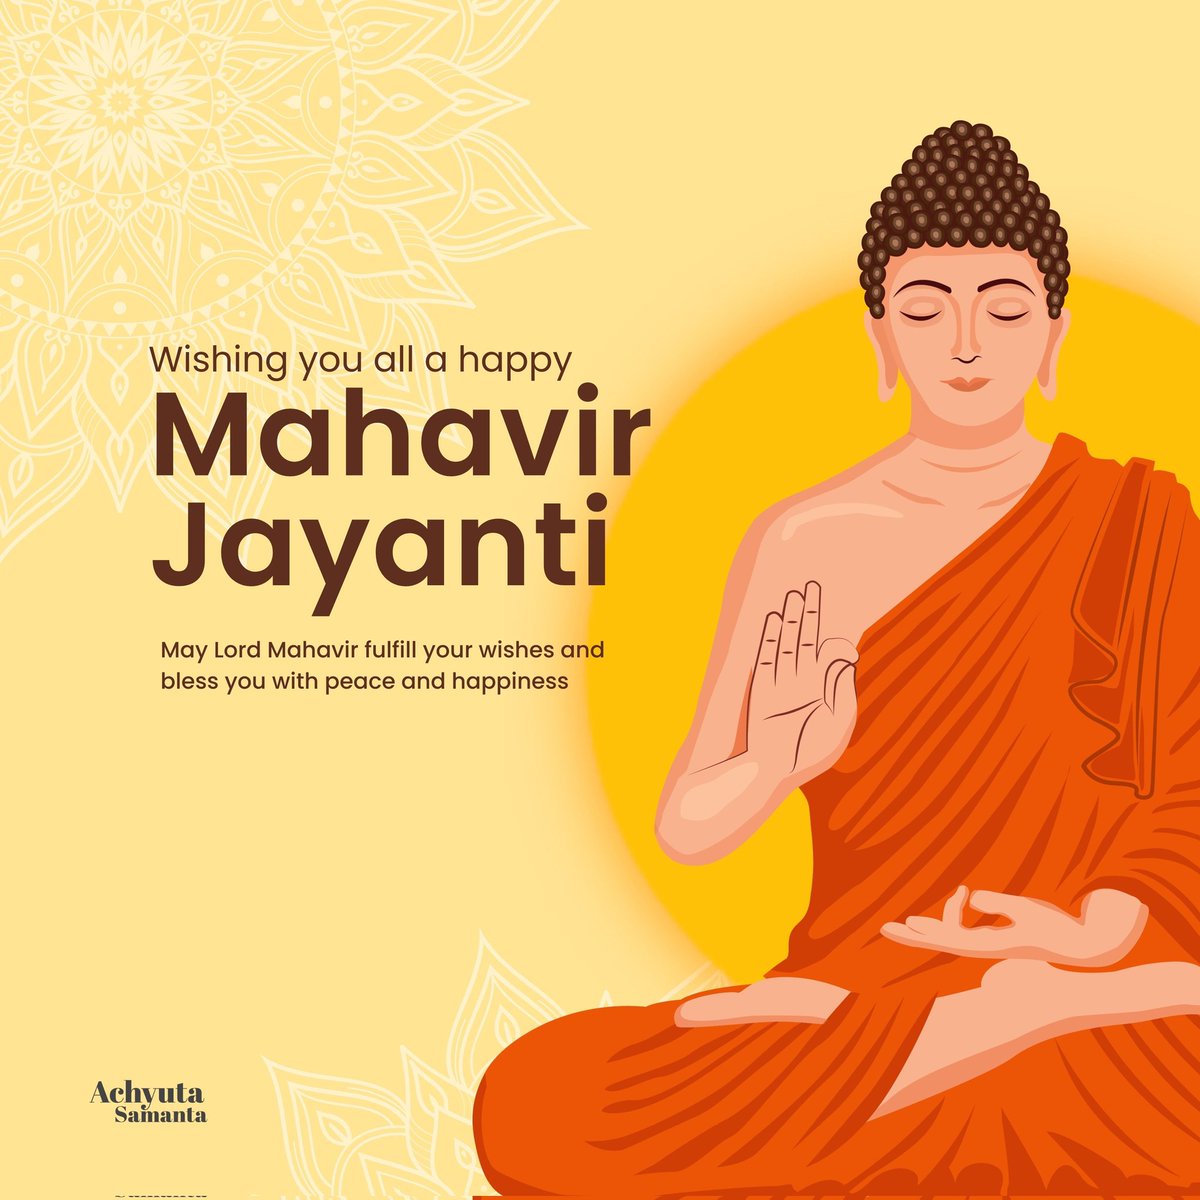 Tributes on the auspicious occasion of Mahavir Jayanti, commemorating the teachings of Lord Mahavir on non-violence, truth, and compassion. May his timeless wisdom guide us towards a path of peace and enlightenment.